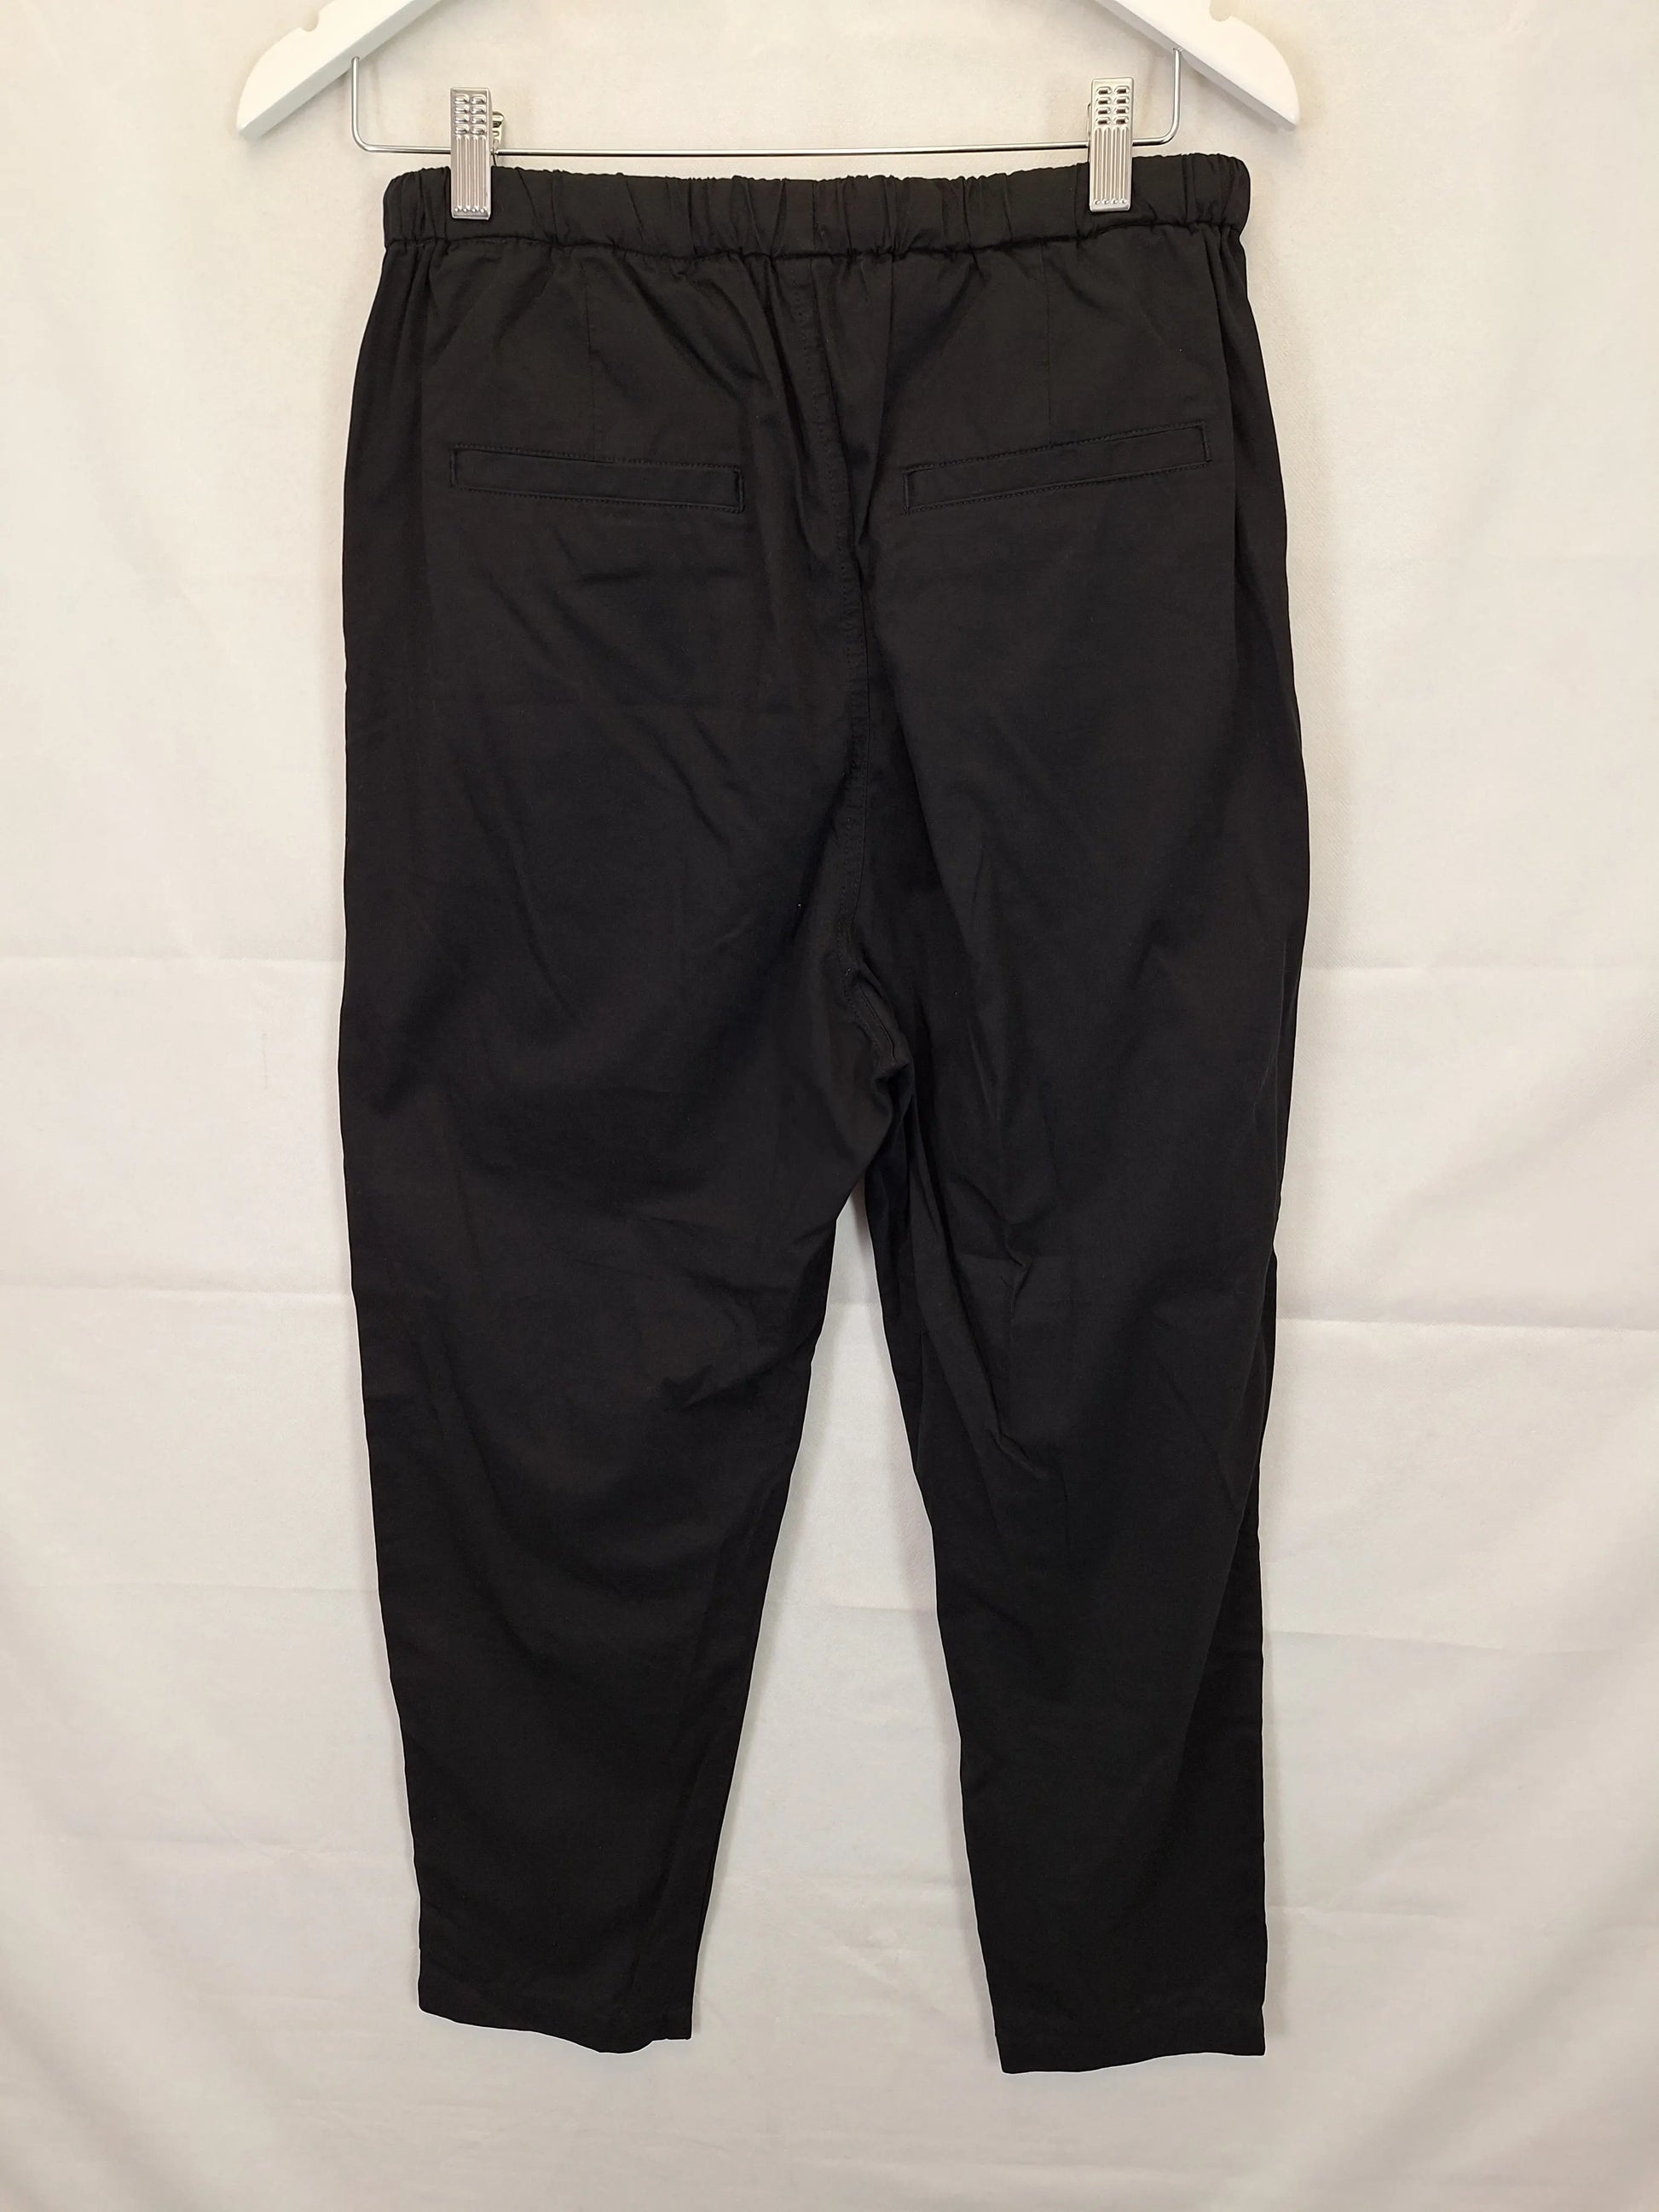 Country Road Waist Tie Black Casual Pants Size 10 – SwapUp